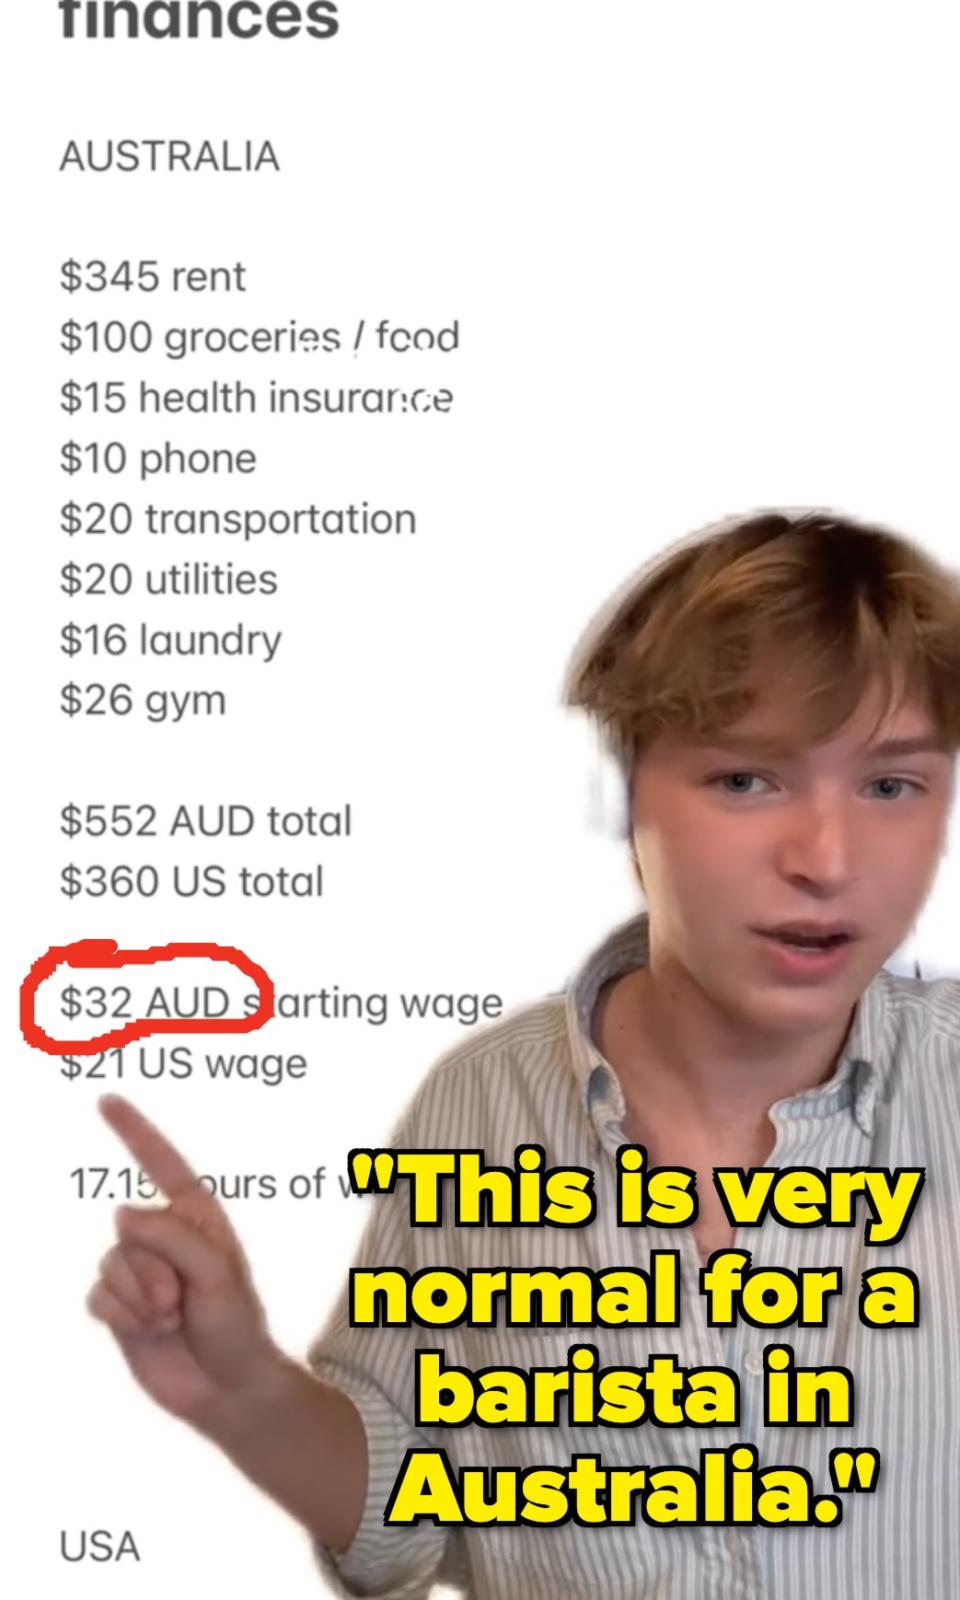 Person comparing cost of living and wages between Australia and the USA, gesturing towards list of expenses